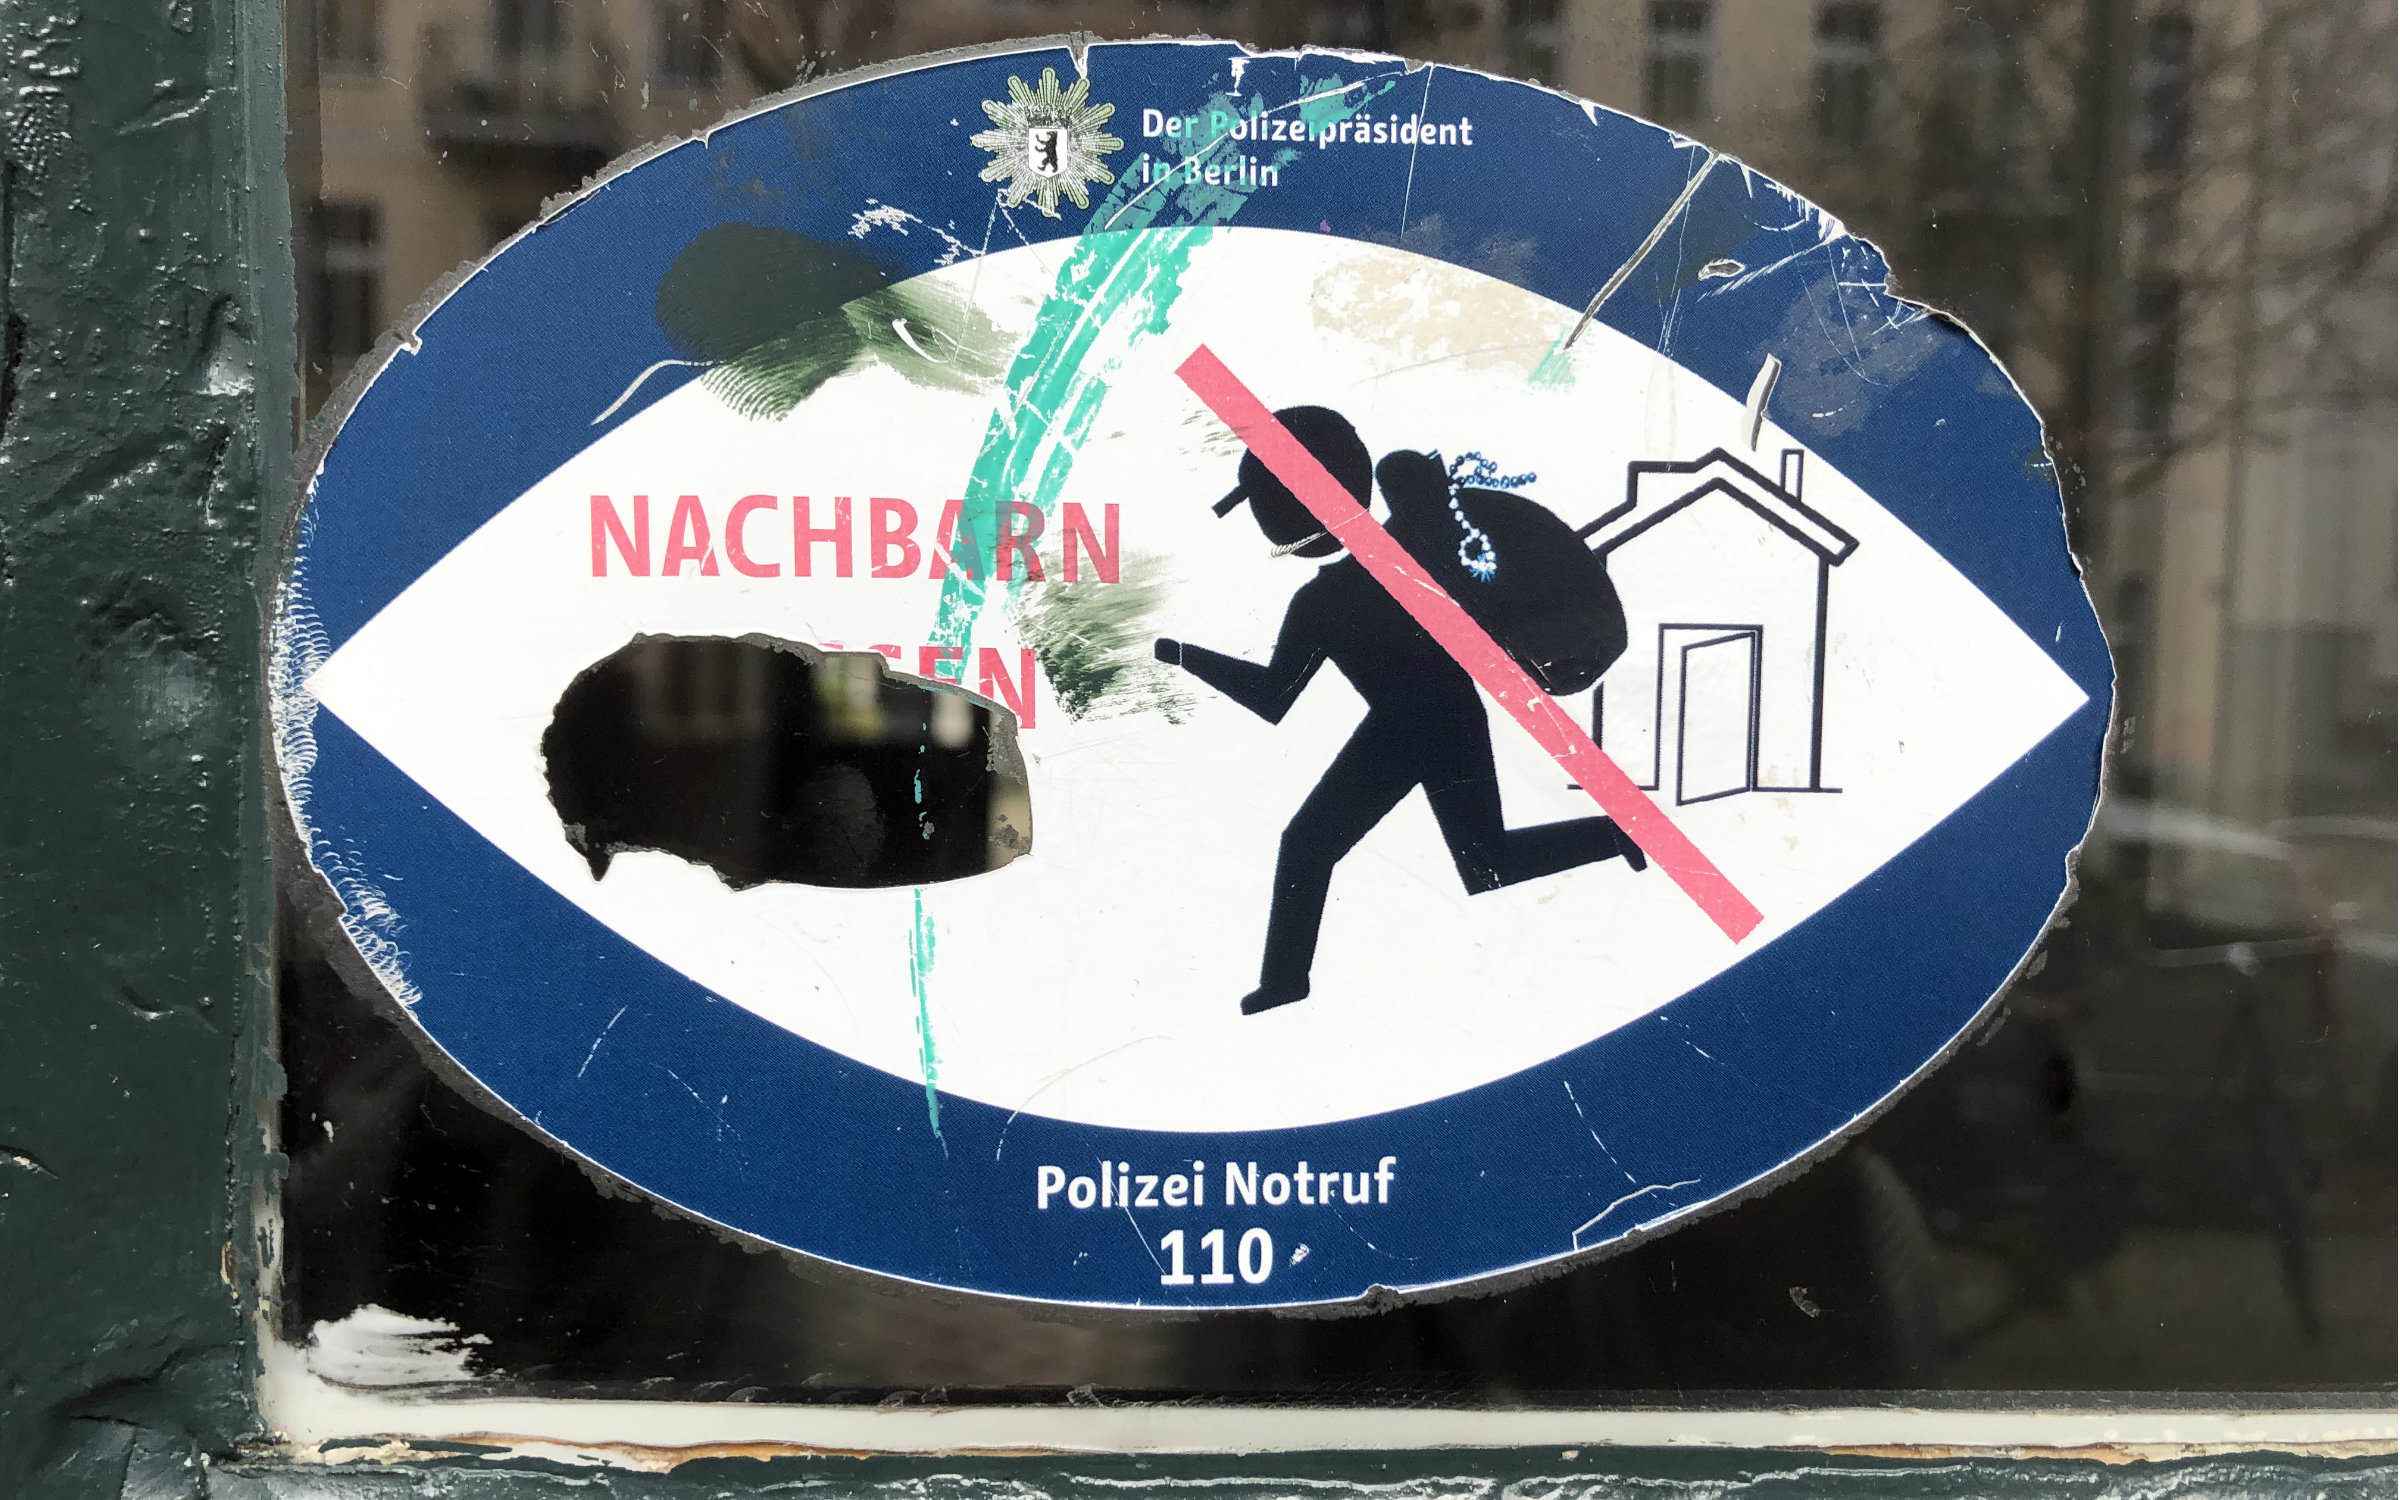 Change Letter (yet unreleased) and Change in use as Berlin’s corporate typeface – Sticker Police